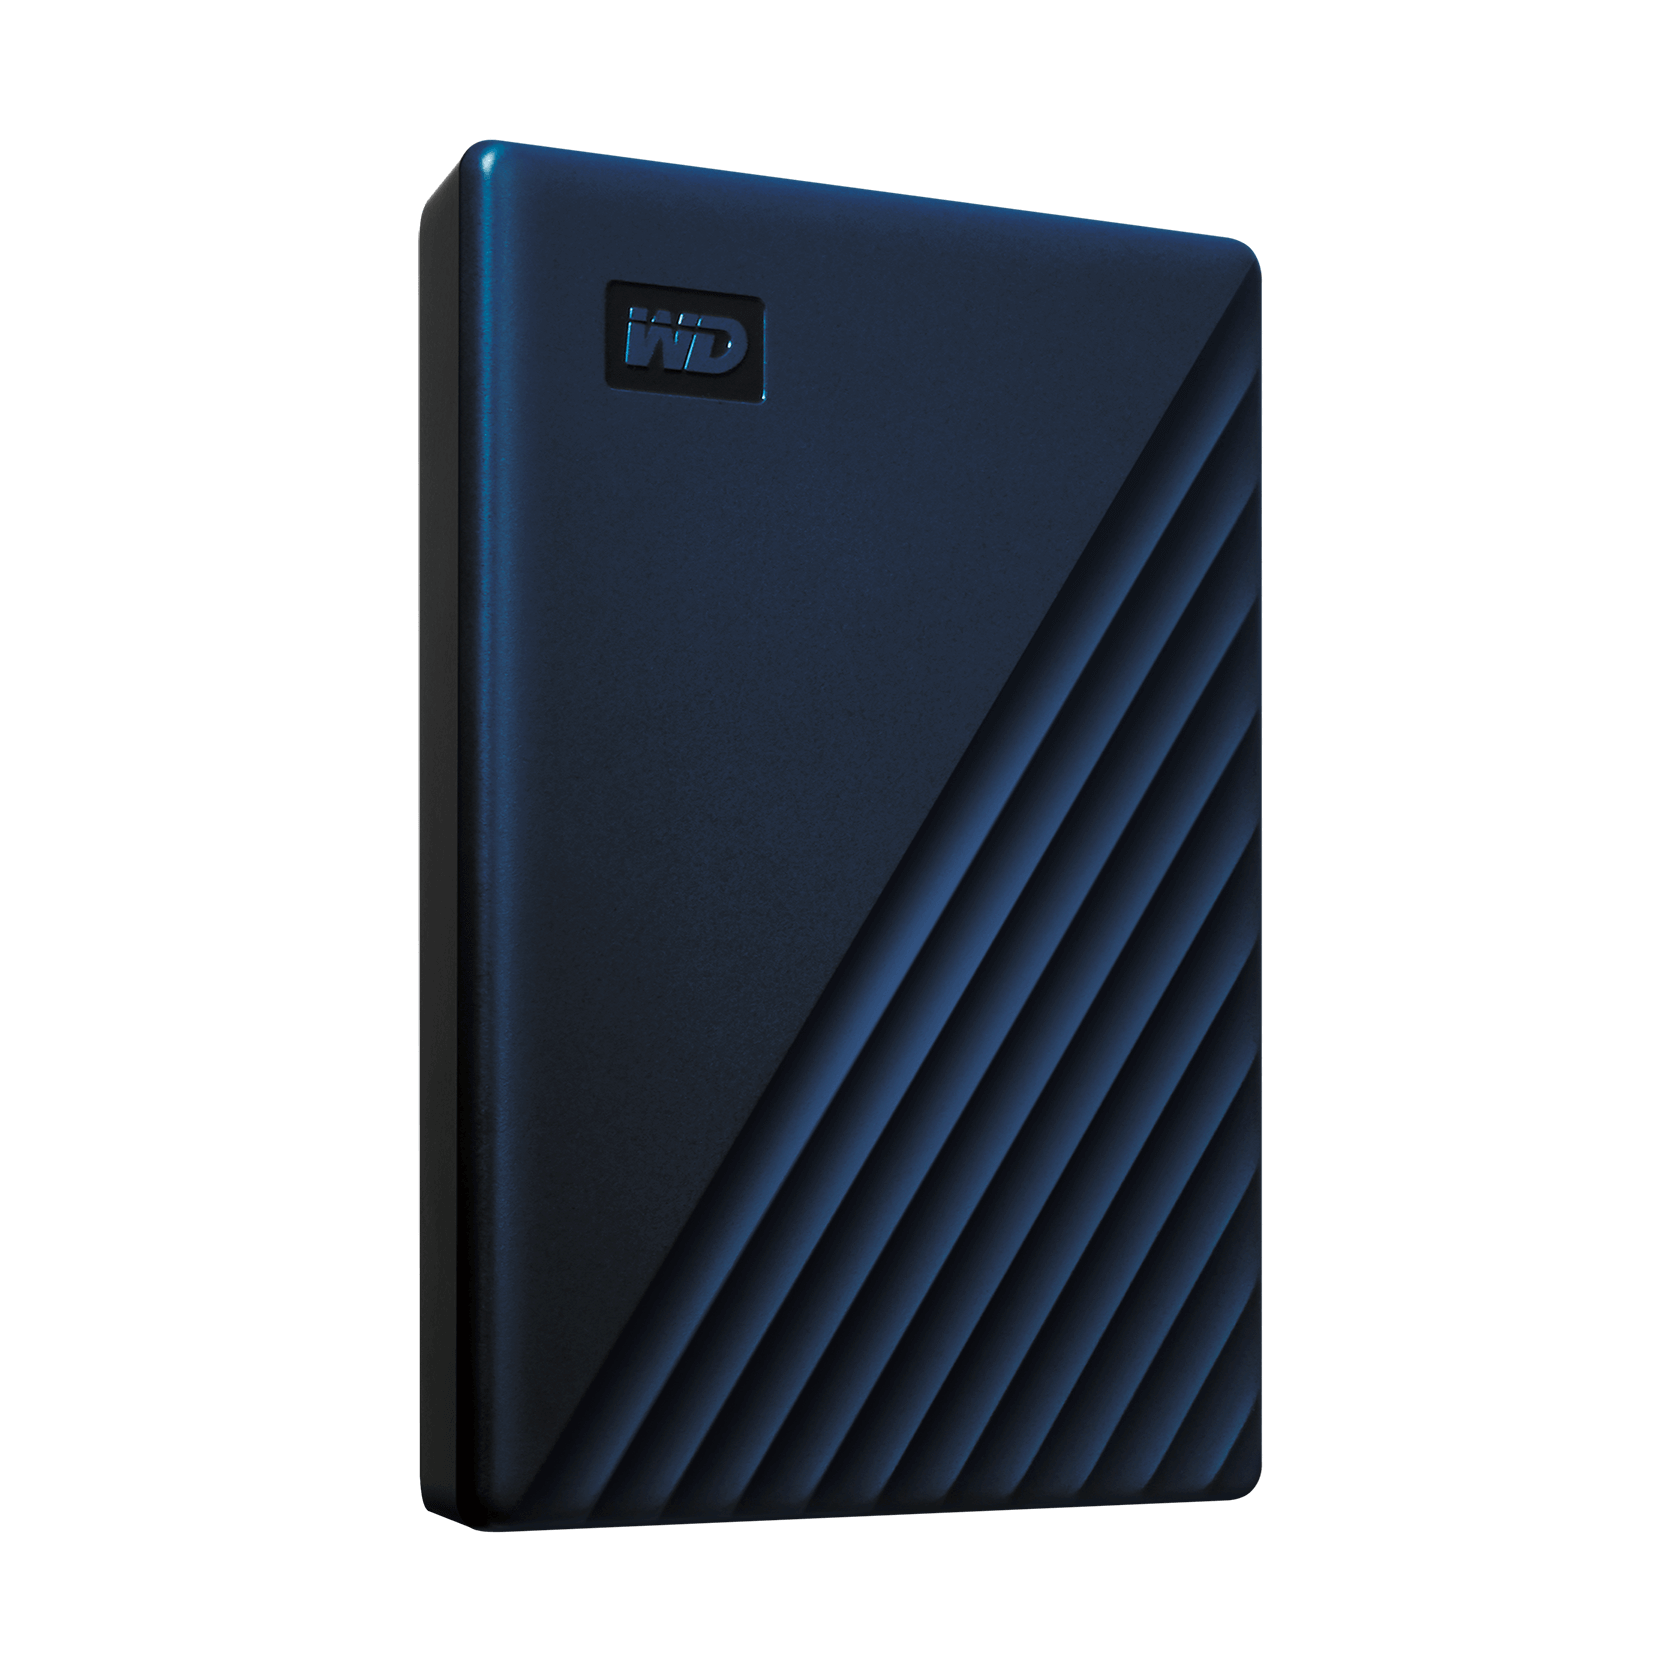 WD 2TB My Passport for Mac, Portable External Hard Drive, Blue - WDBA2D0020BBL-WESN - image 3 of 8